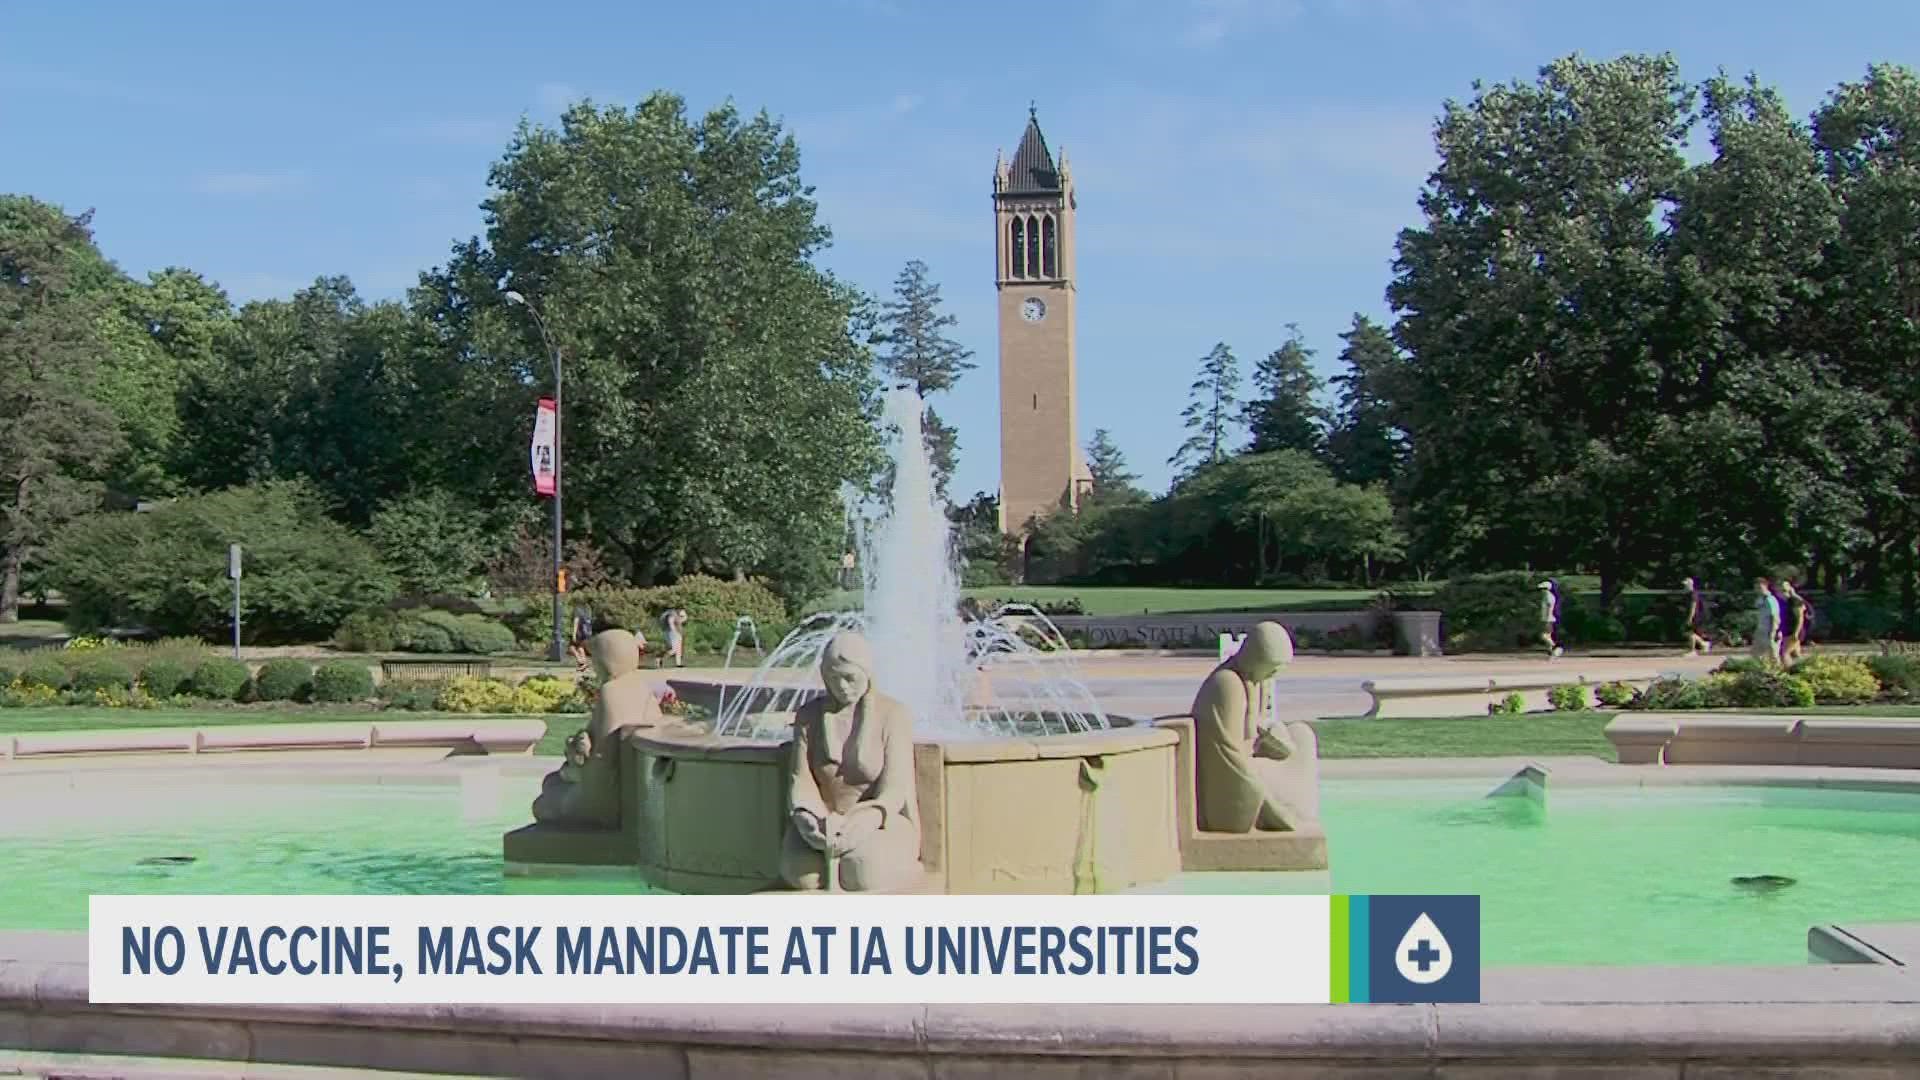 The University of Iowa, Iowa State University, and the University of Northern Iowa will not be enforcing masks or requiring vaccines this school year.